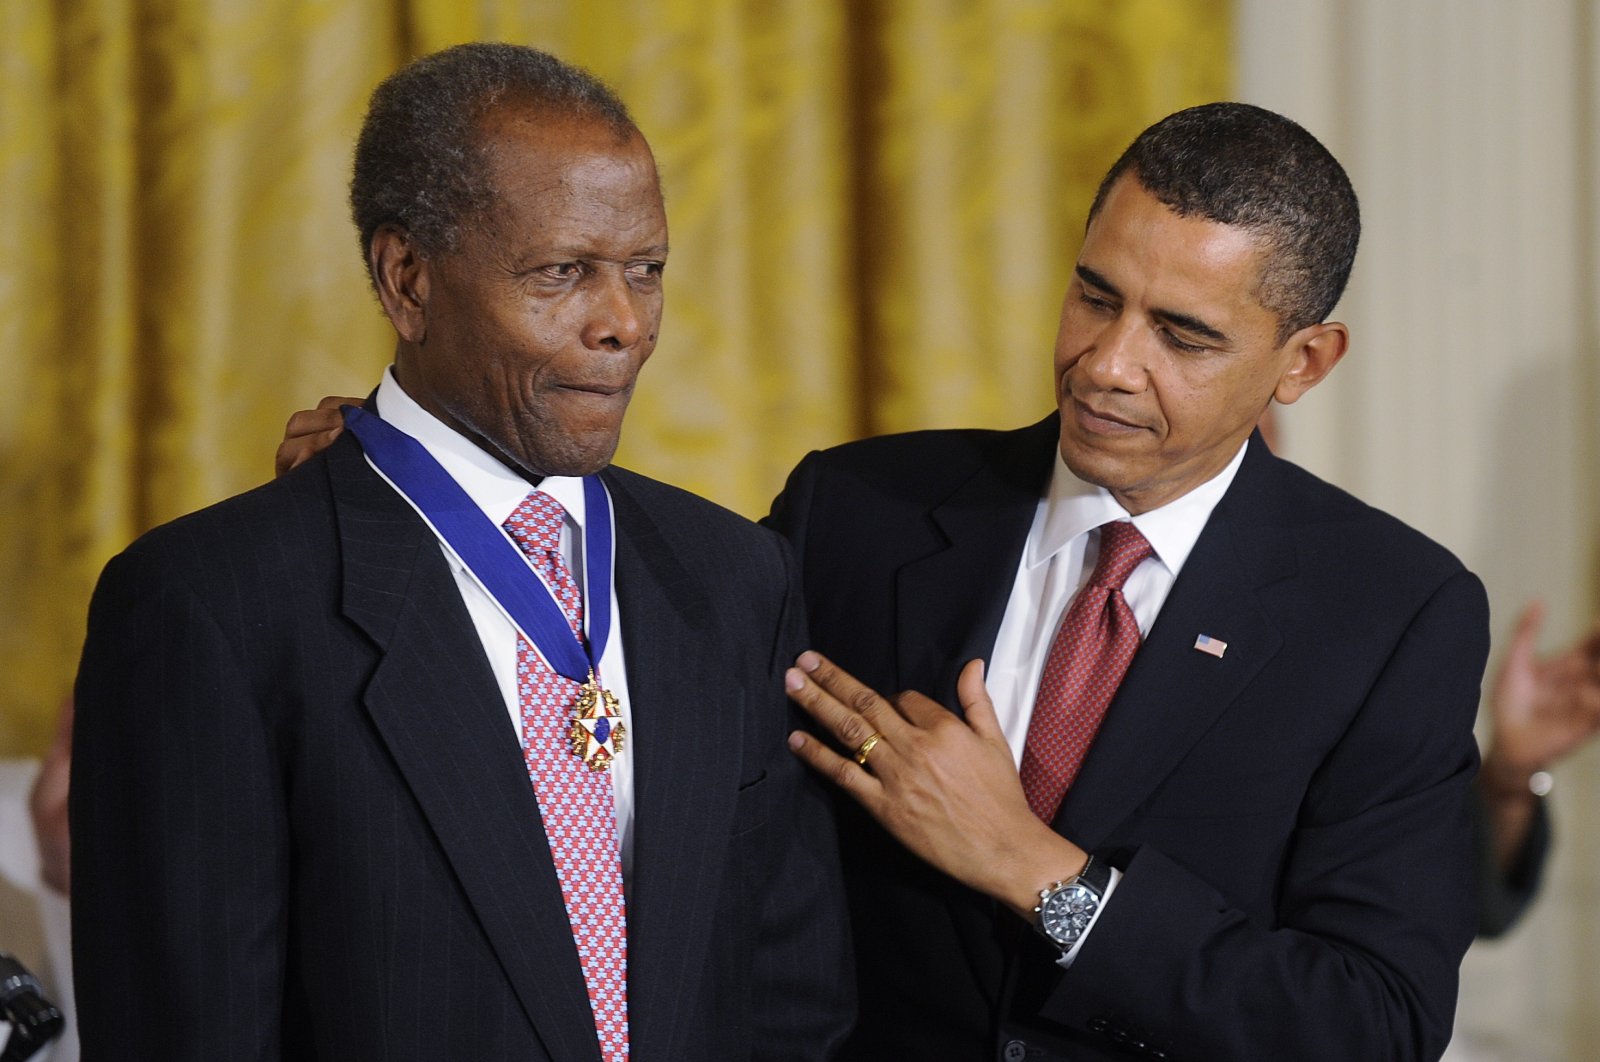 U.S. President Barack Obama (R) awards U.S. actor Sidney Poitier with the Presidential Medal of Freedom during a ceremony in the East Room of the White House in Washington, D.C., Aug. 12, 2009 (EPA Photo)